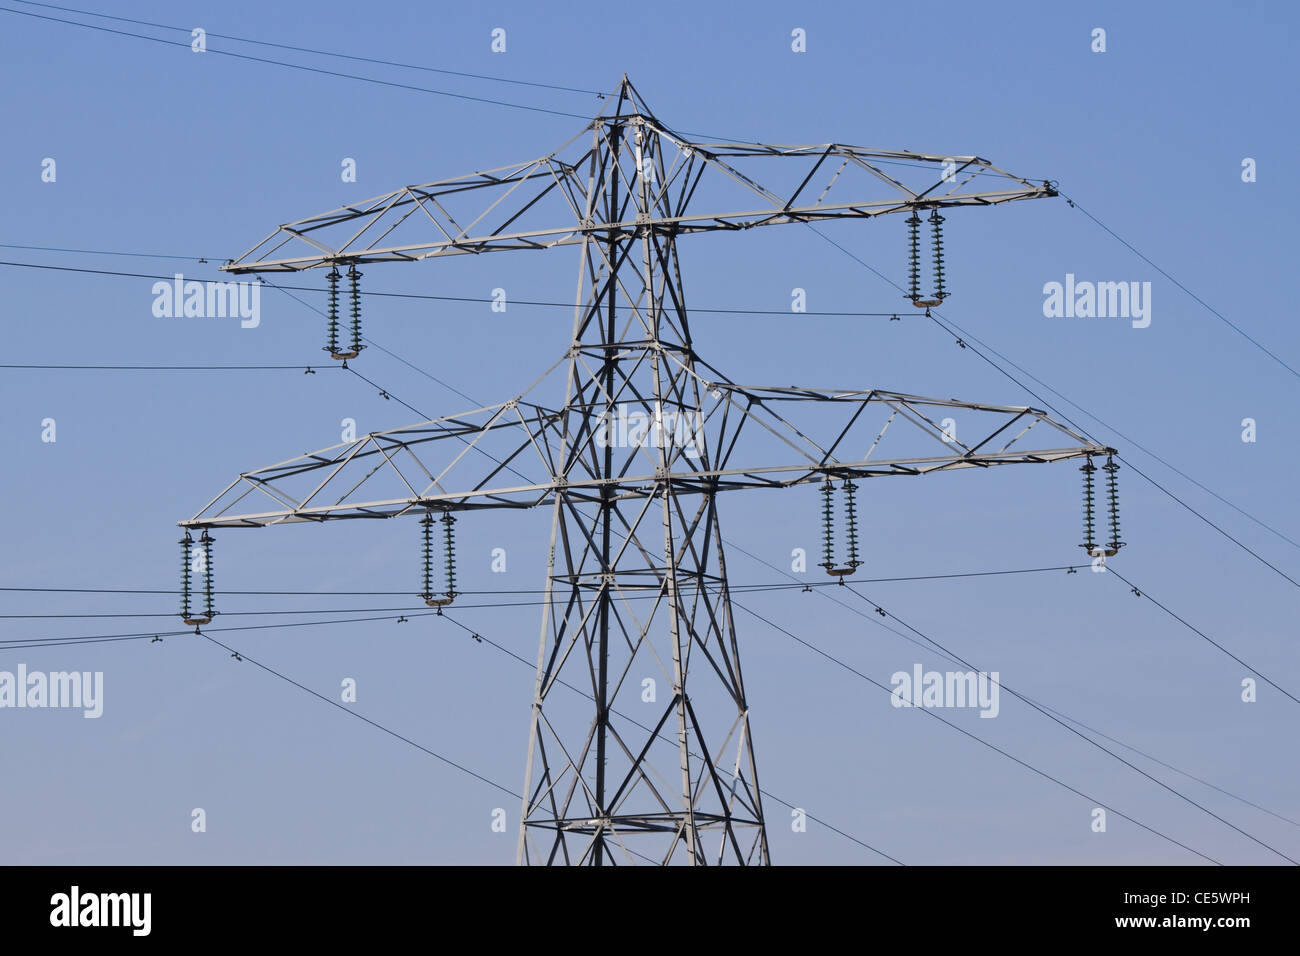 Pylon with electricity wires for energy supply and blue sky background Stock Photo